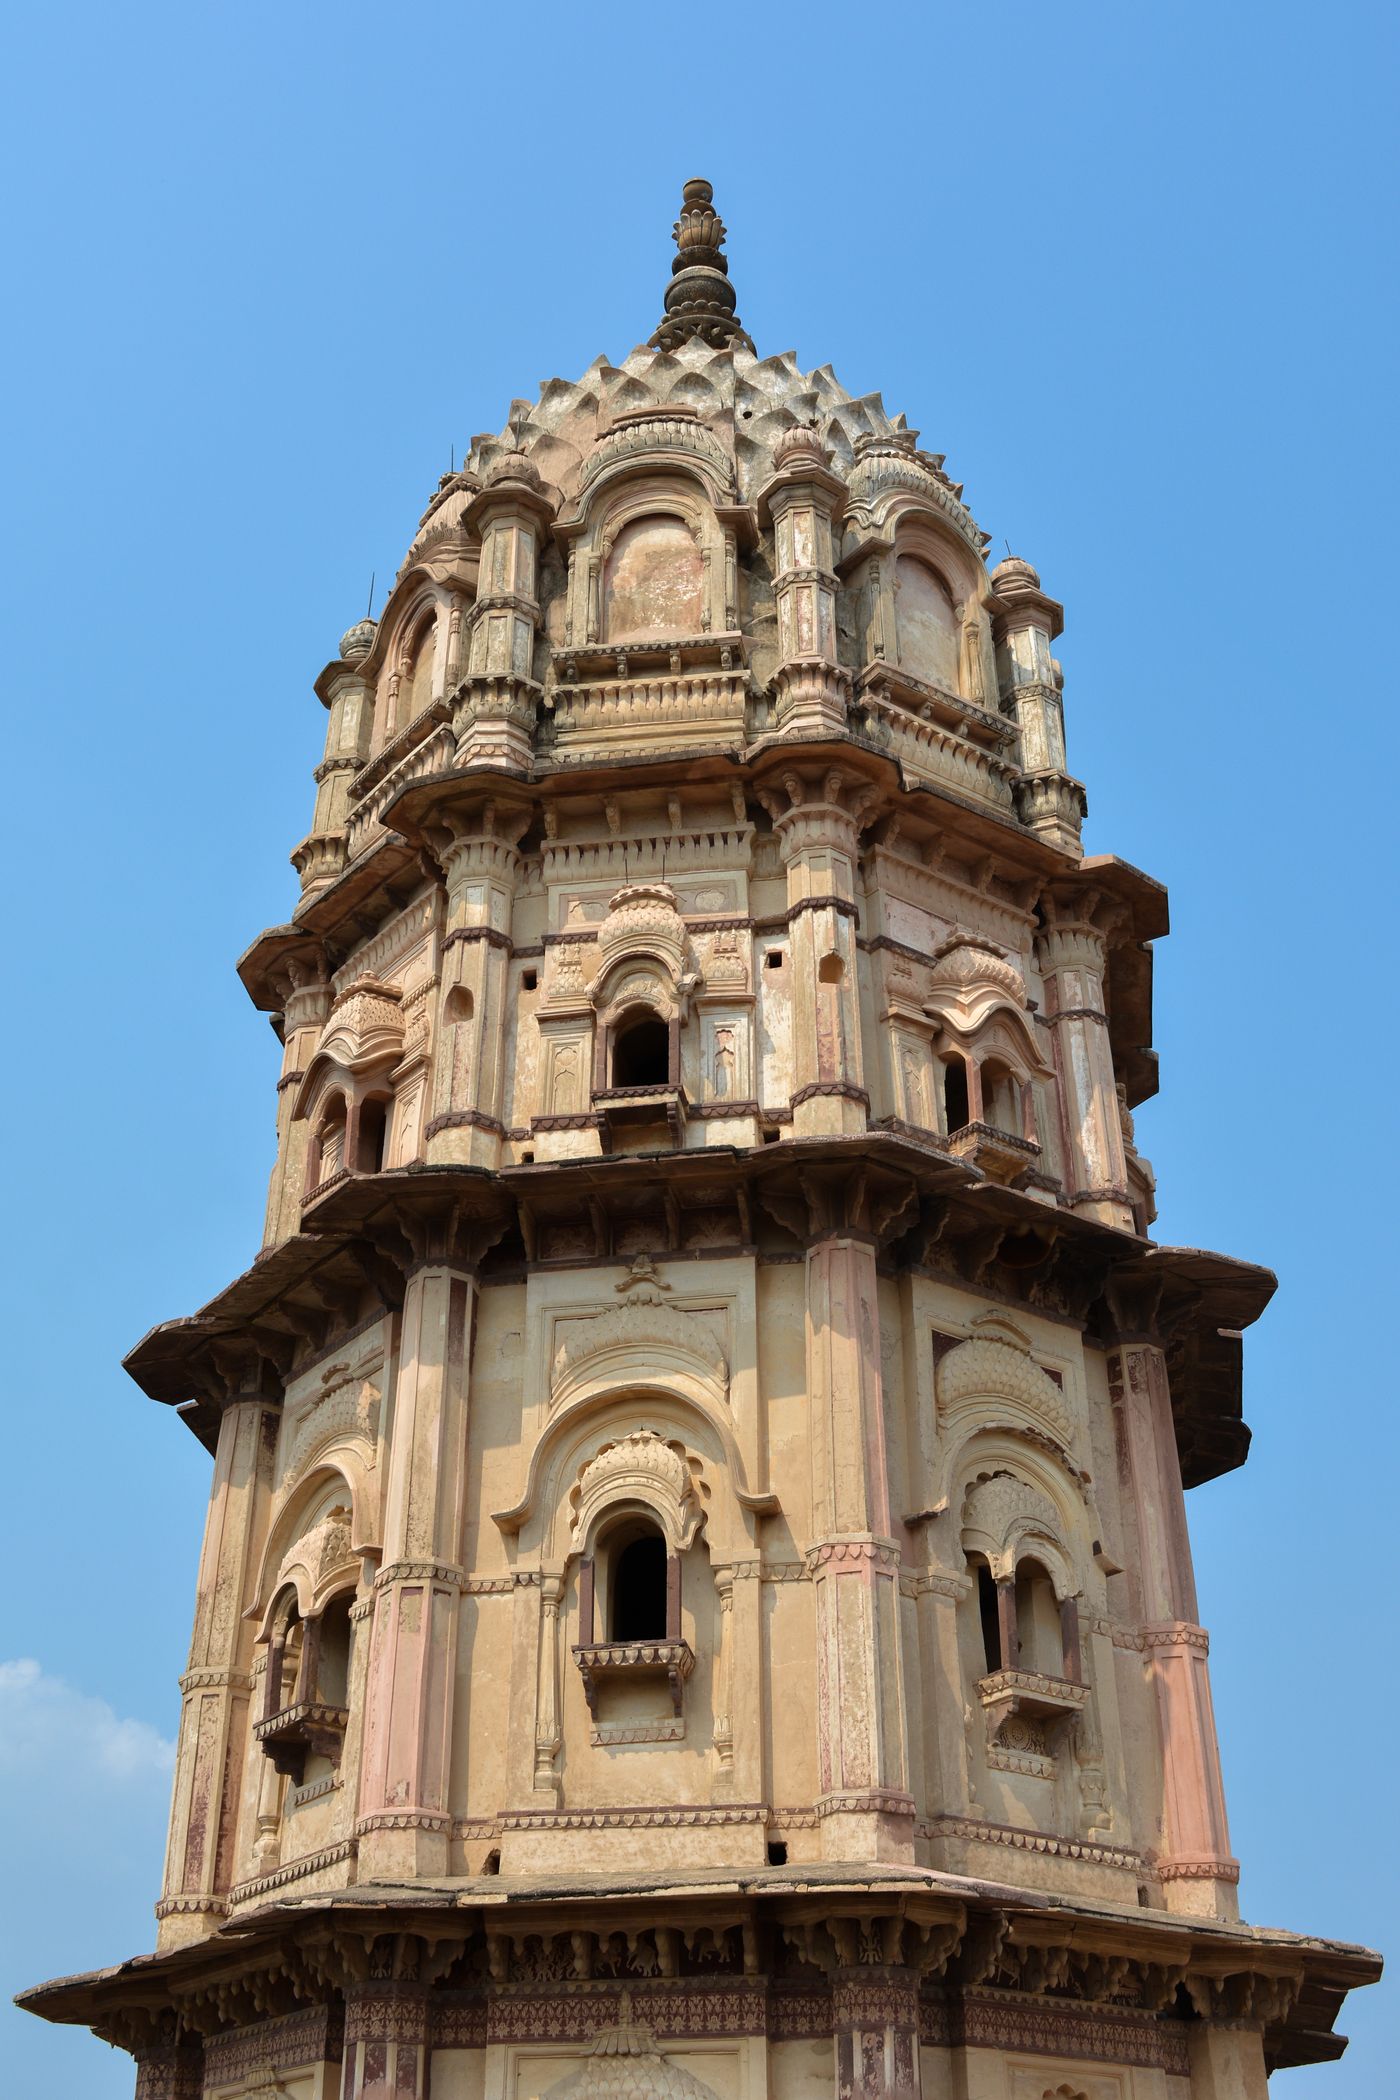 The high domed octagonal watchtower of Lakshmi Narayan Temple in Orchha, lined with false balconies and cannon openings.